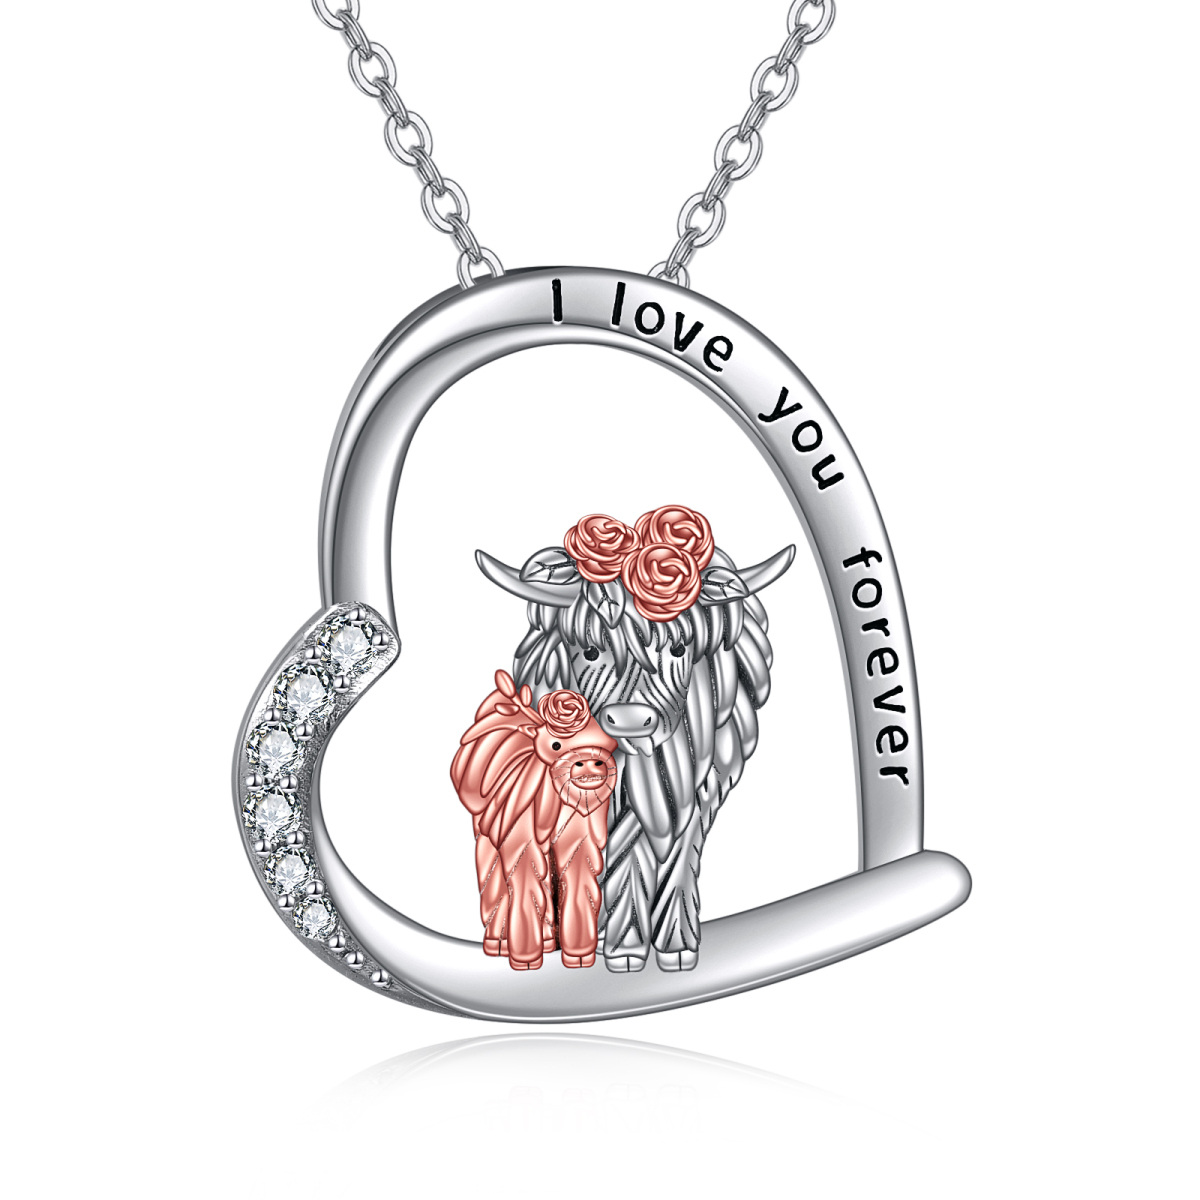 Sterling Silver Two-tone Heart Highland Cow & Rose Pendant Necklace with Engraved Word-1